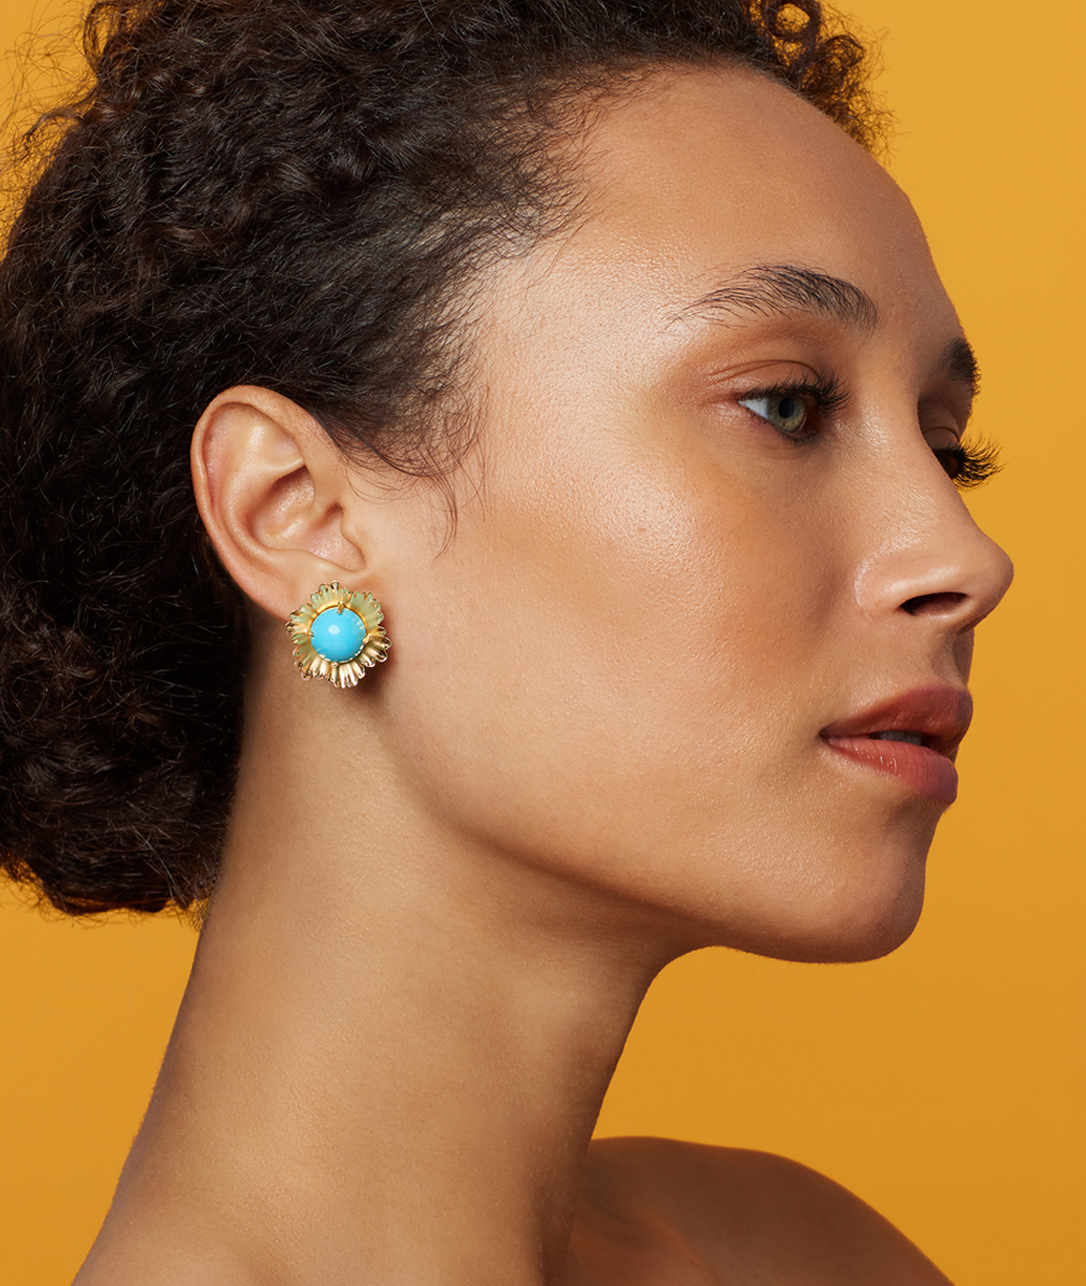                                                                 For glitzy types, our Super Bloom Studs showcase a lustrous center stone like turquoise, pink opal, or pearl.SHOP SUPER BLOOM STUDS                                                